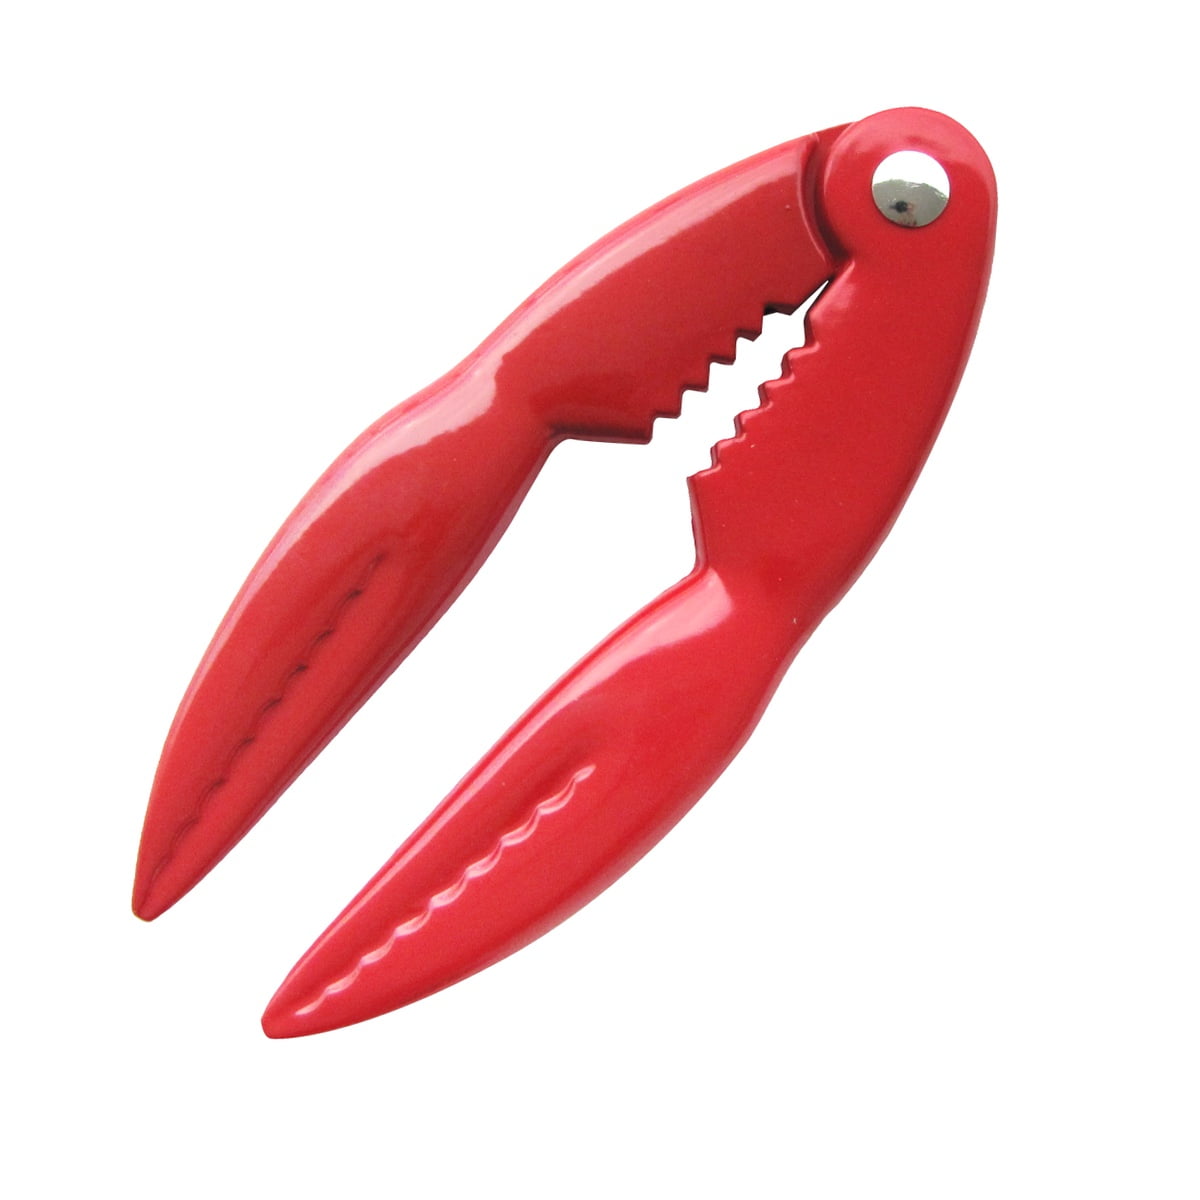 Nuts 1x Metal Heavy Duty Nut Cracker for Cracking Shells Lobster Claws & More 